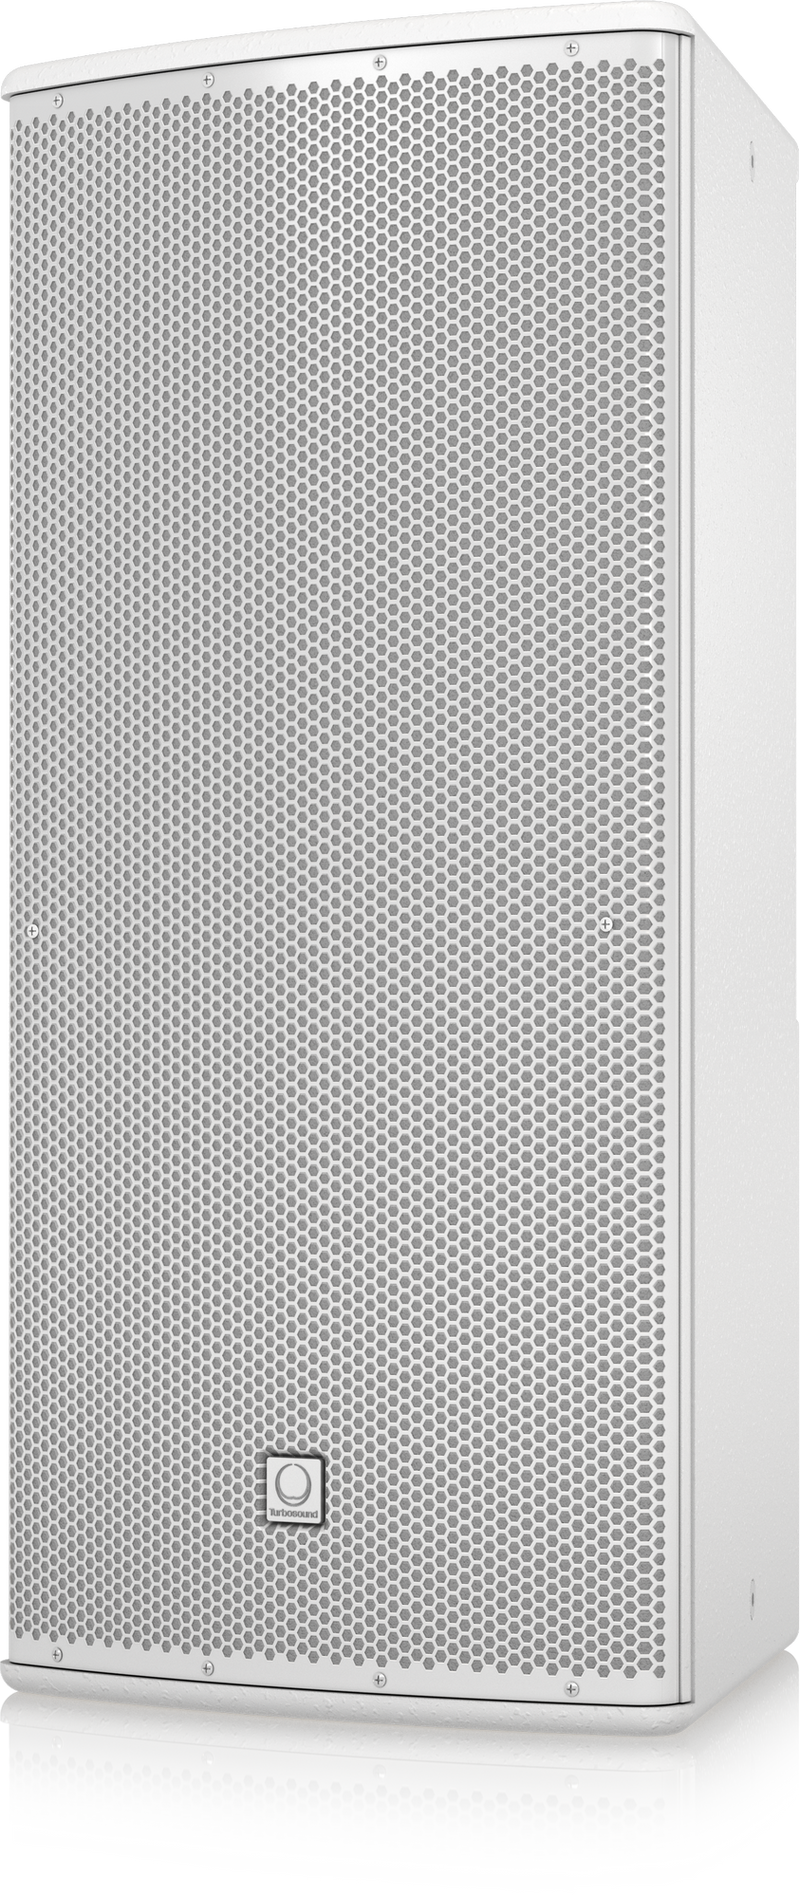 Turbosound TCS122/94 Arrayable 2 Way 12" Full Range Loudspeaker with Dendritic Waveguide for Installation Applications - DEMO